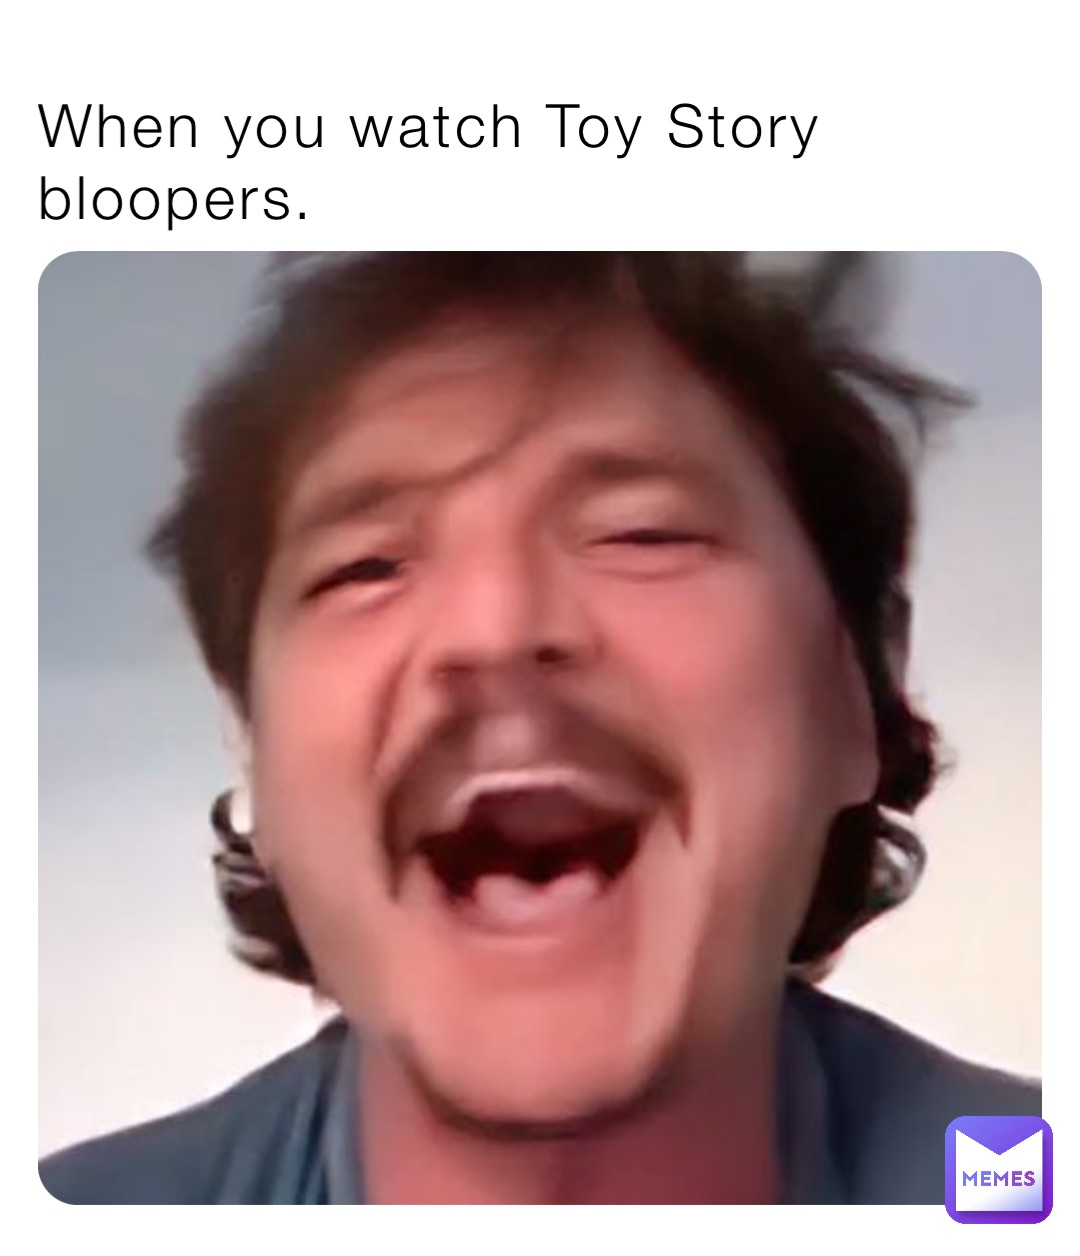 When you watch Toy Story bloopers.